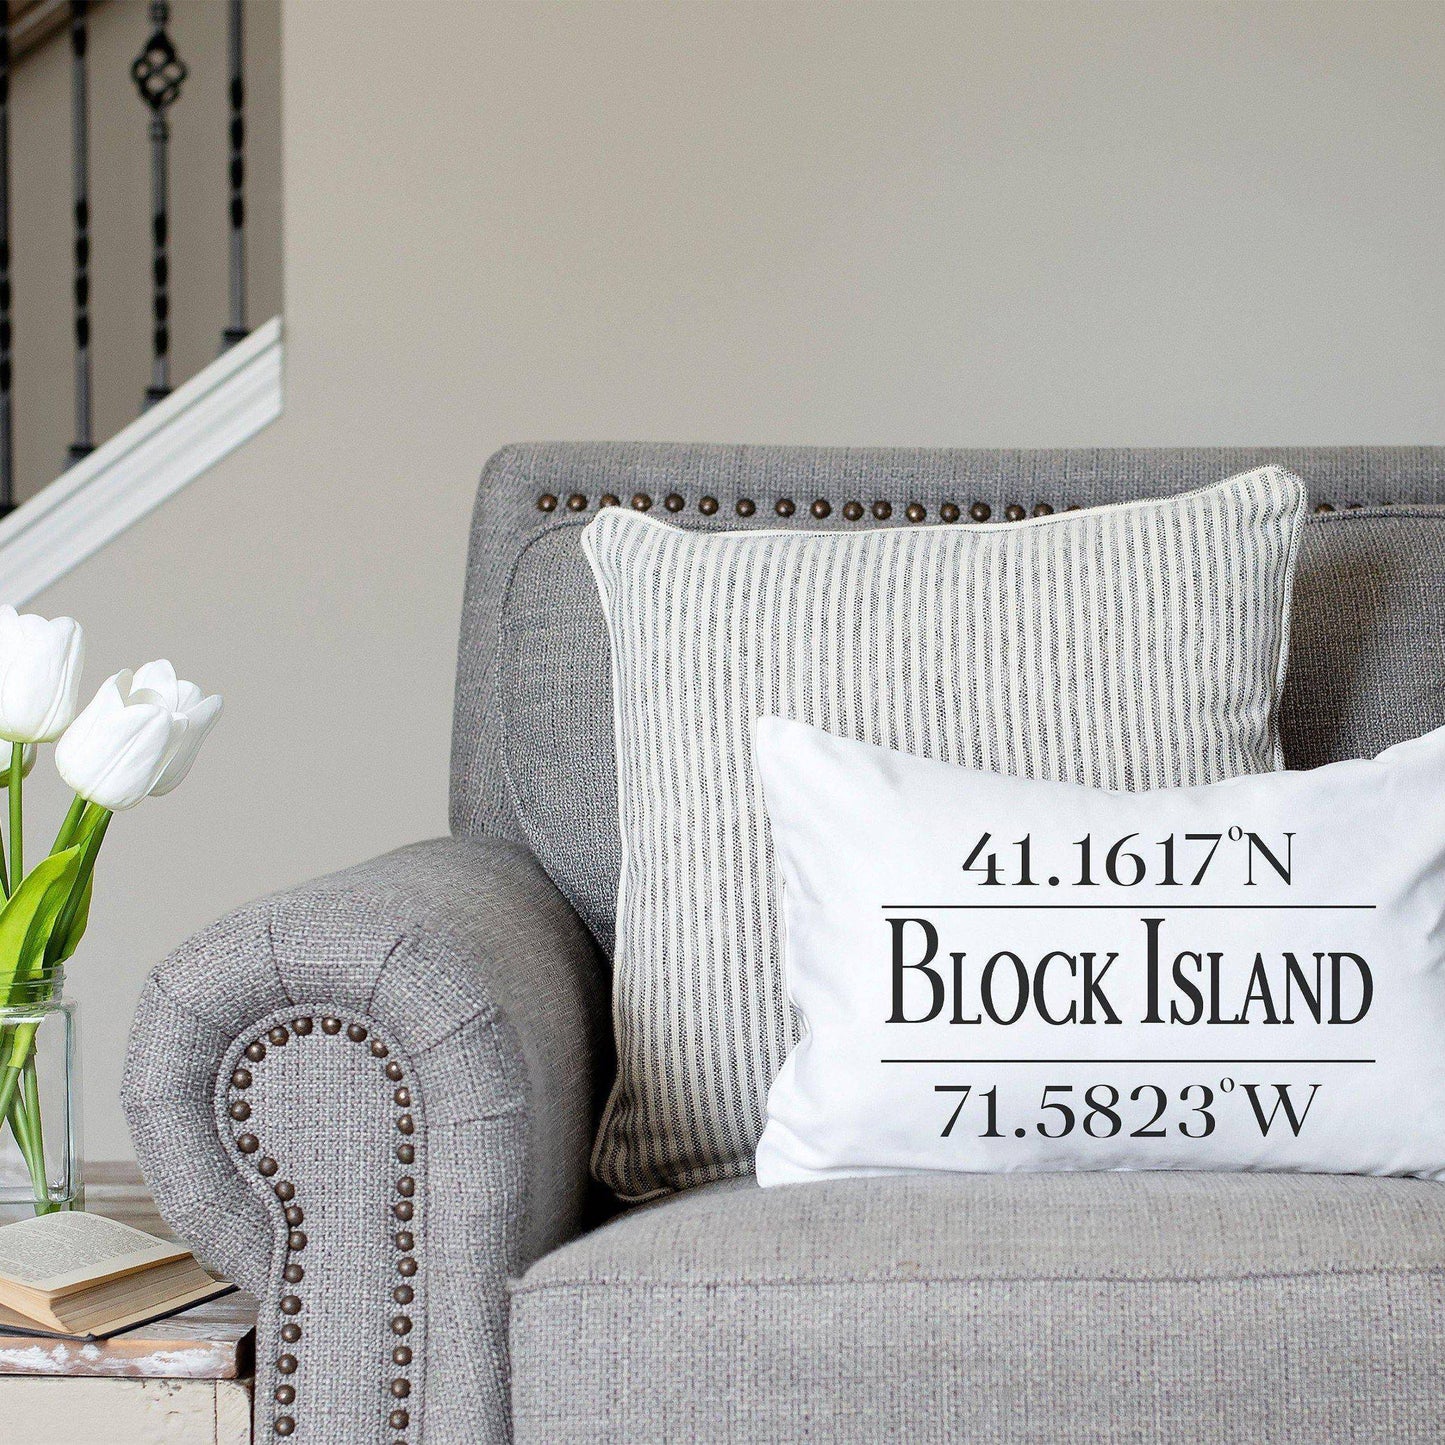 Block Island Coordinates Pillow - Drifts East- White poly/canvas pillow with black ink